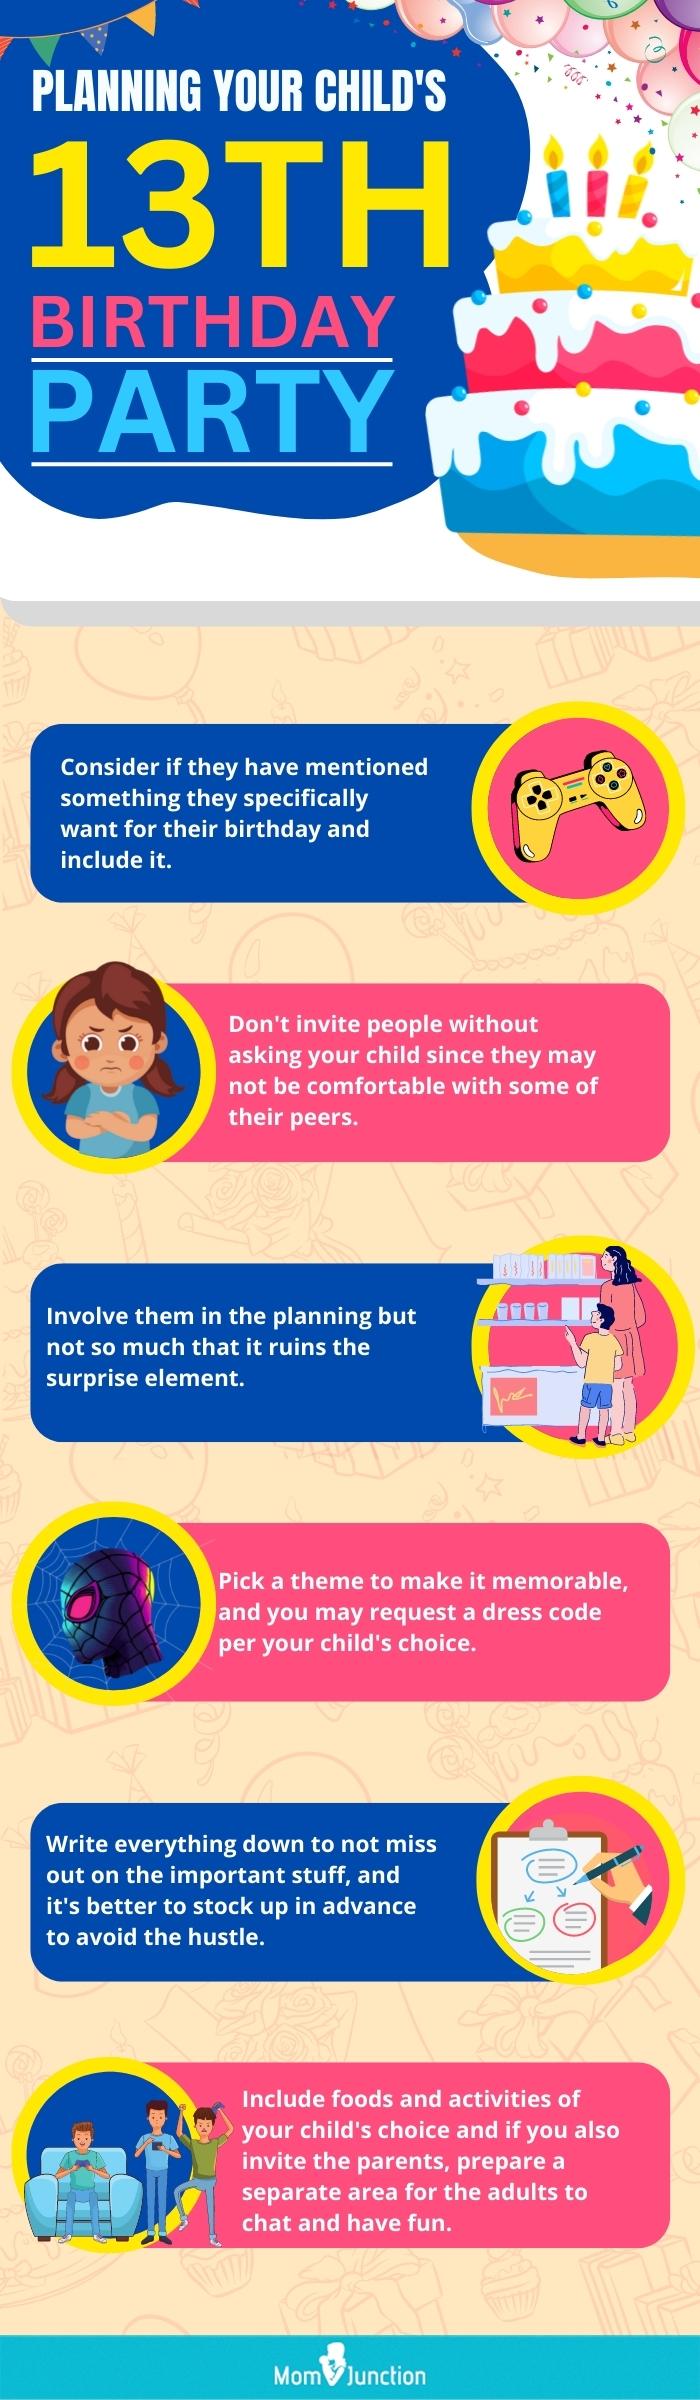 13th year old birthday party [infographic]